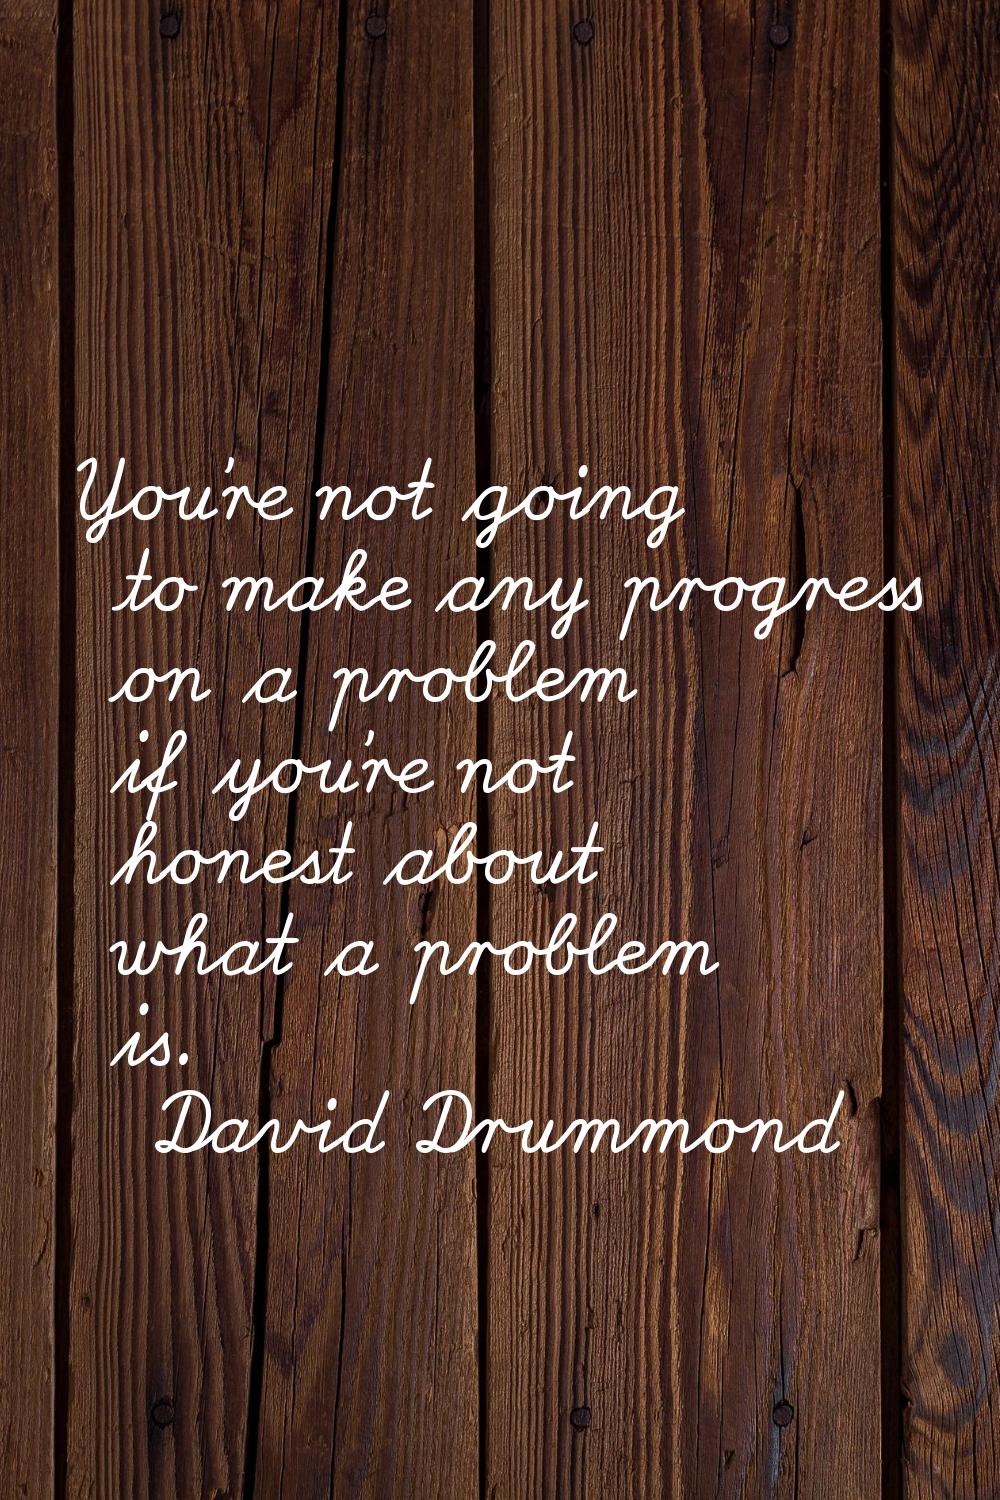 You're not going to make any progress on a problem if you're not honest about what a problem is.